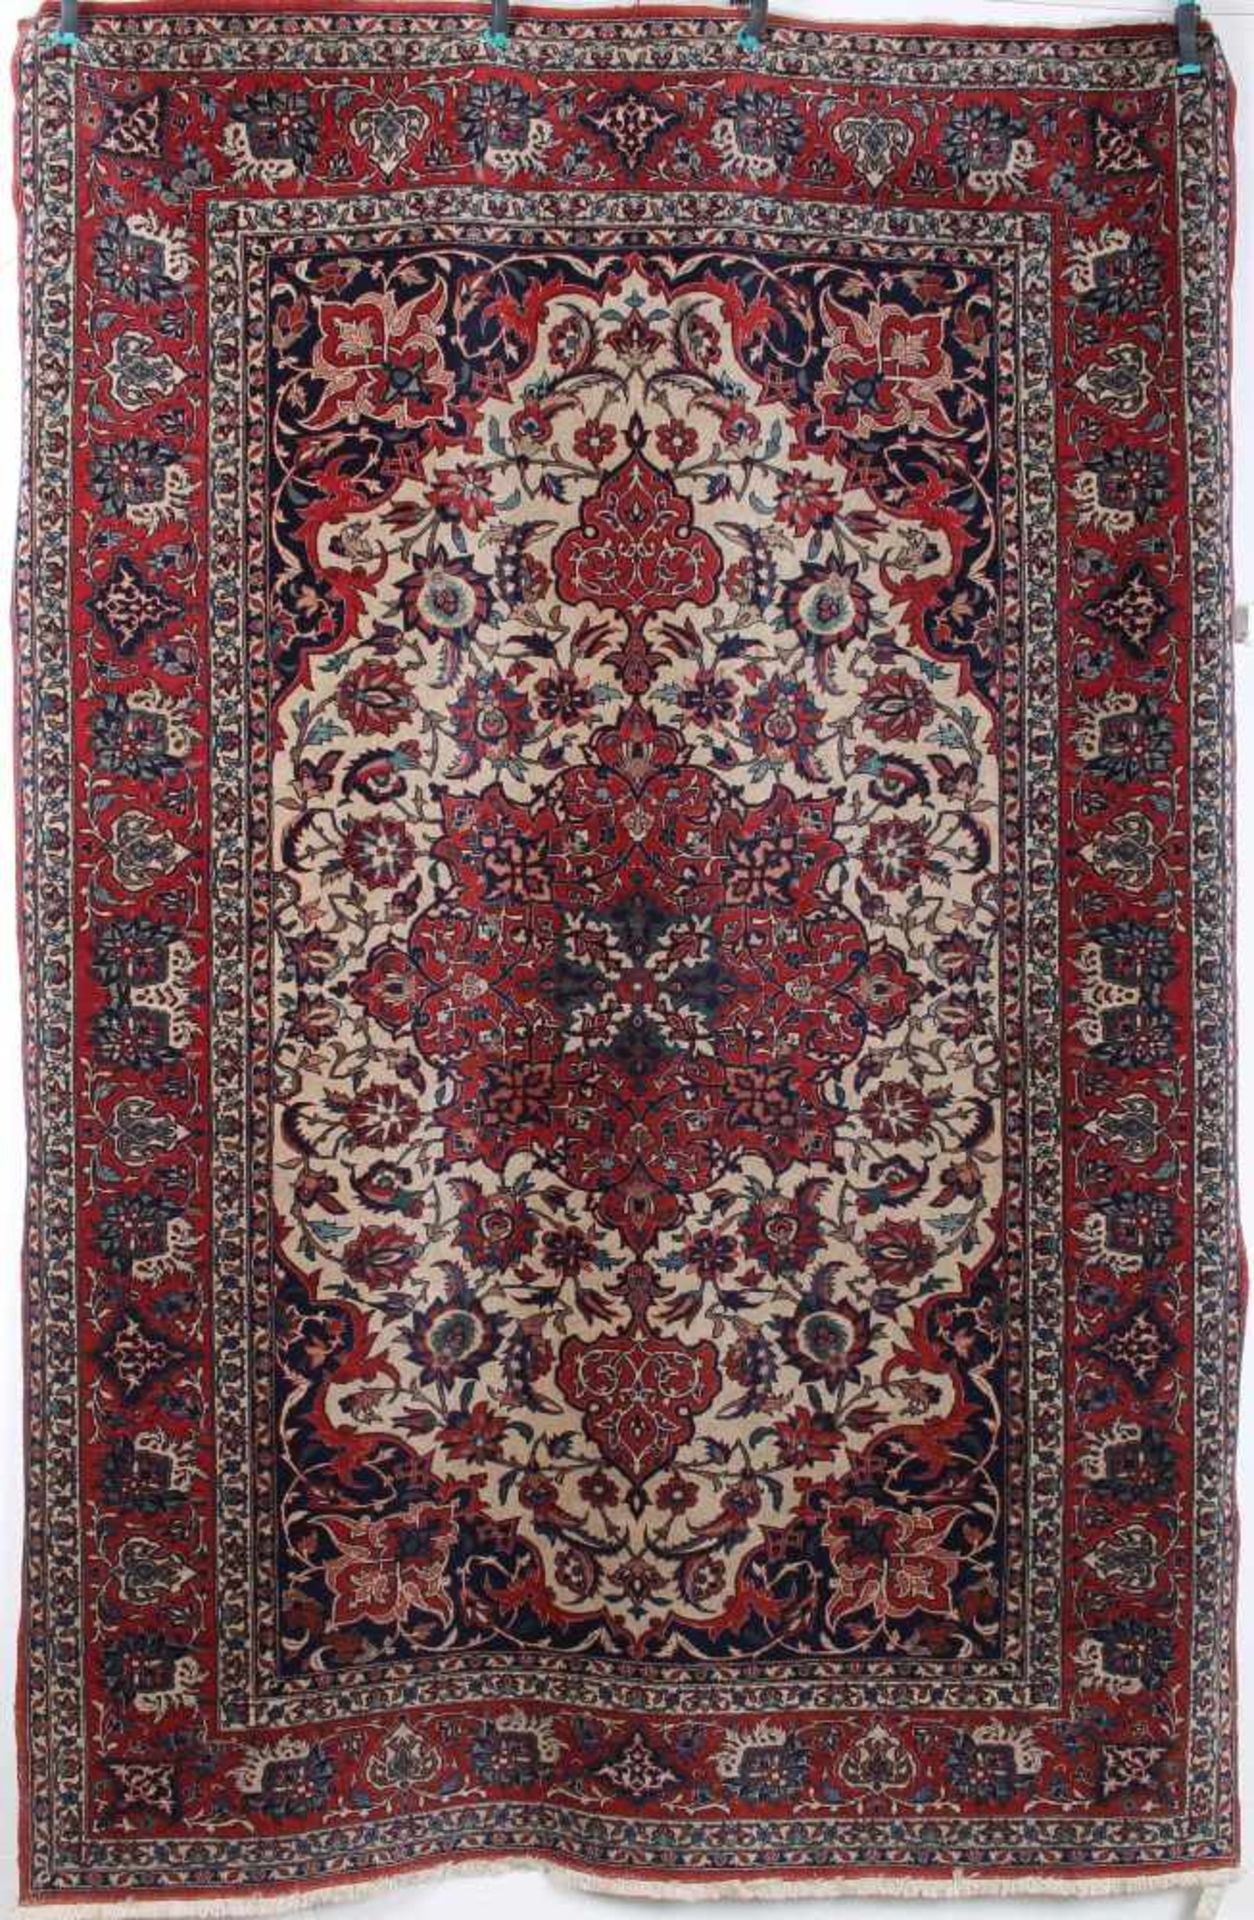 Großer Teppich, Isfahan, large persian carpet,